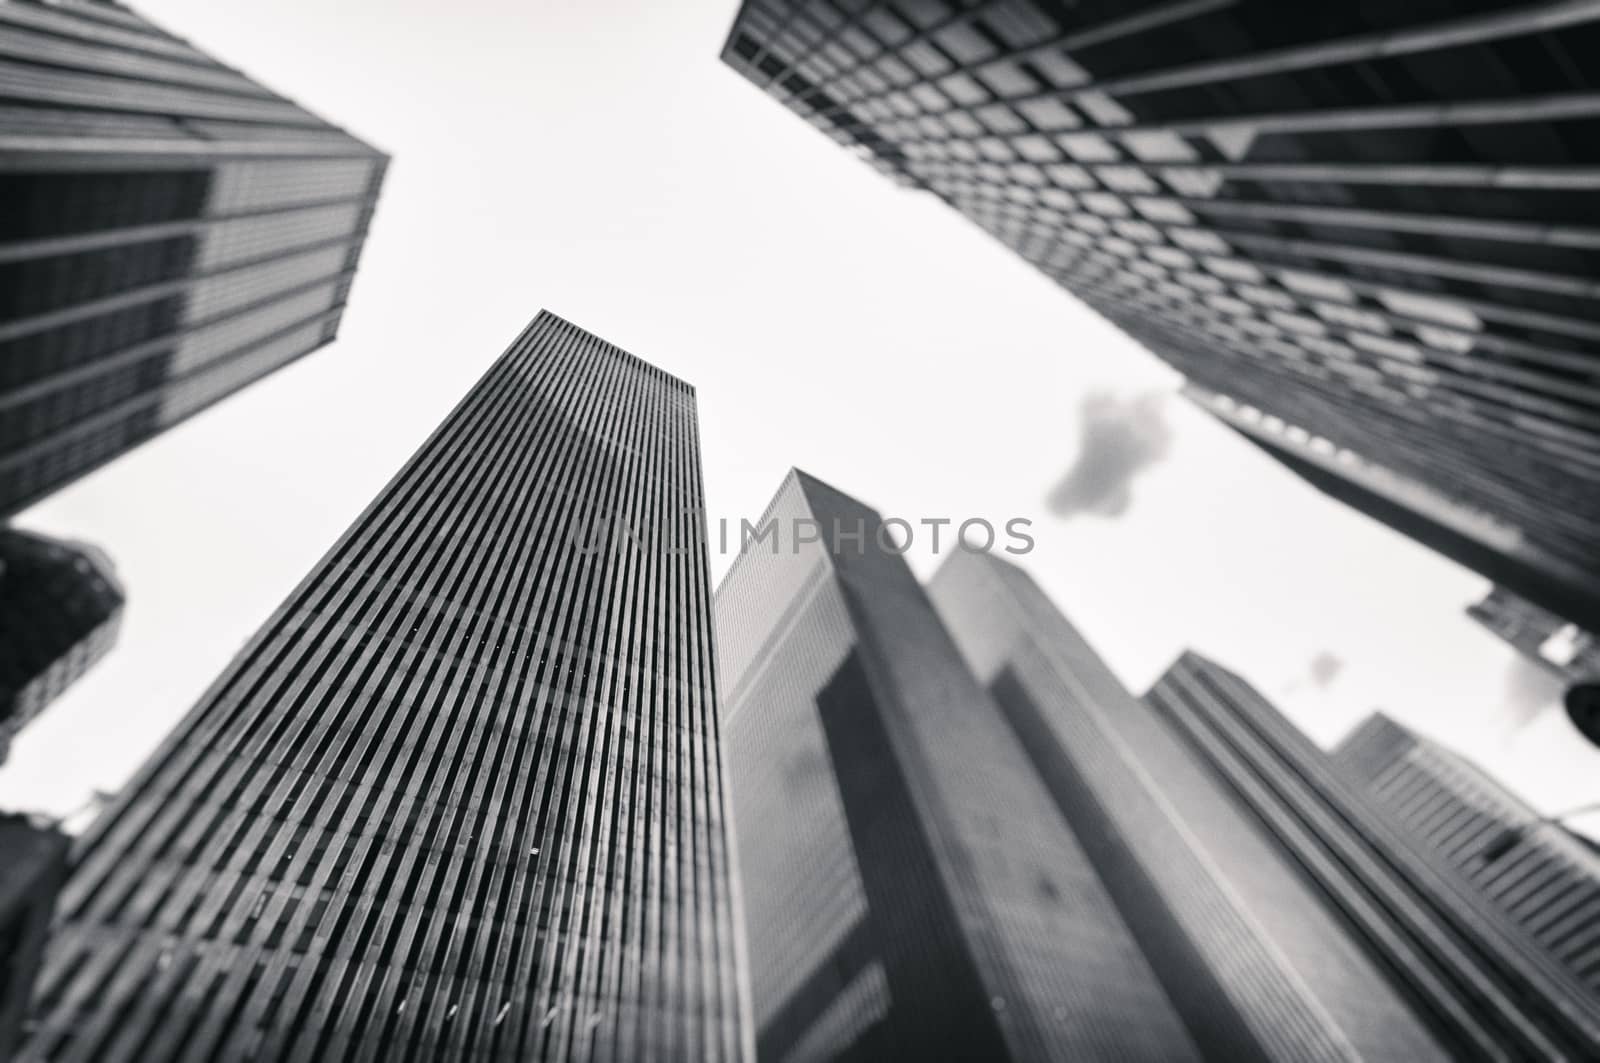 Photograph of a building in New York CIty